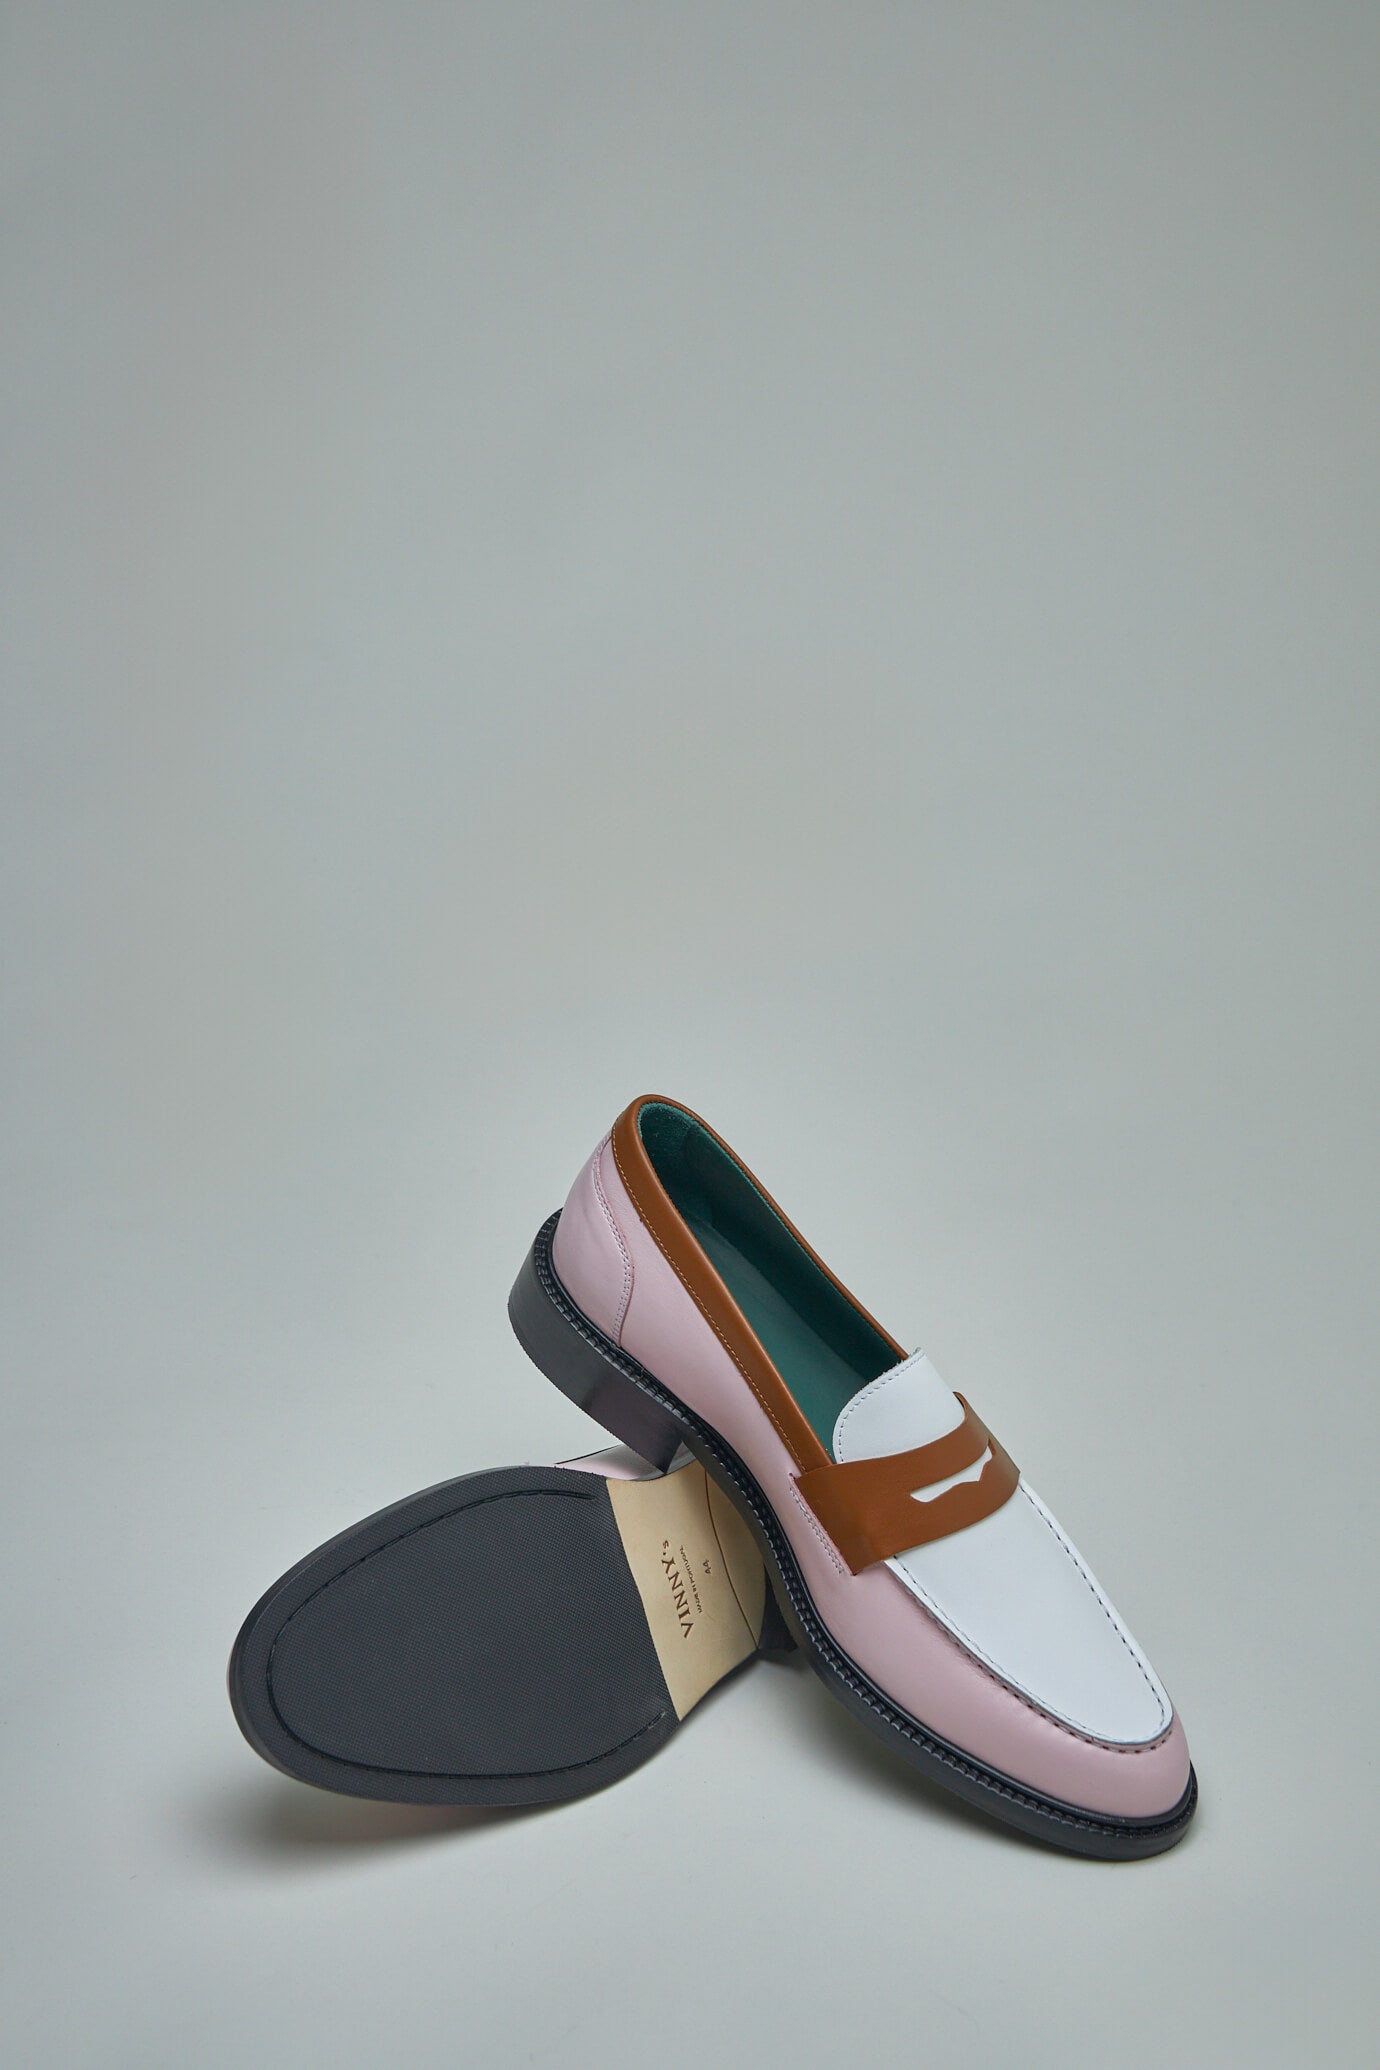 Townee Tri-Tone Penny Loafer